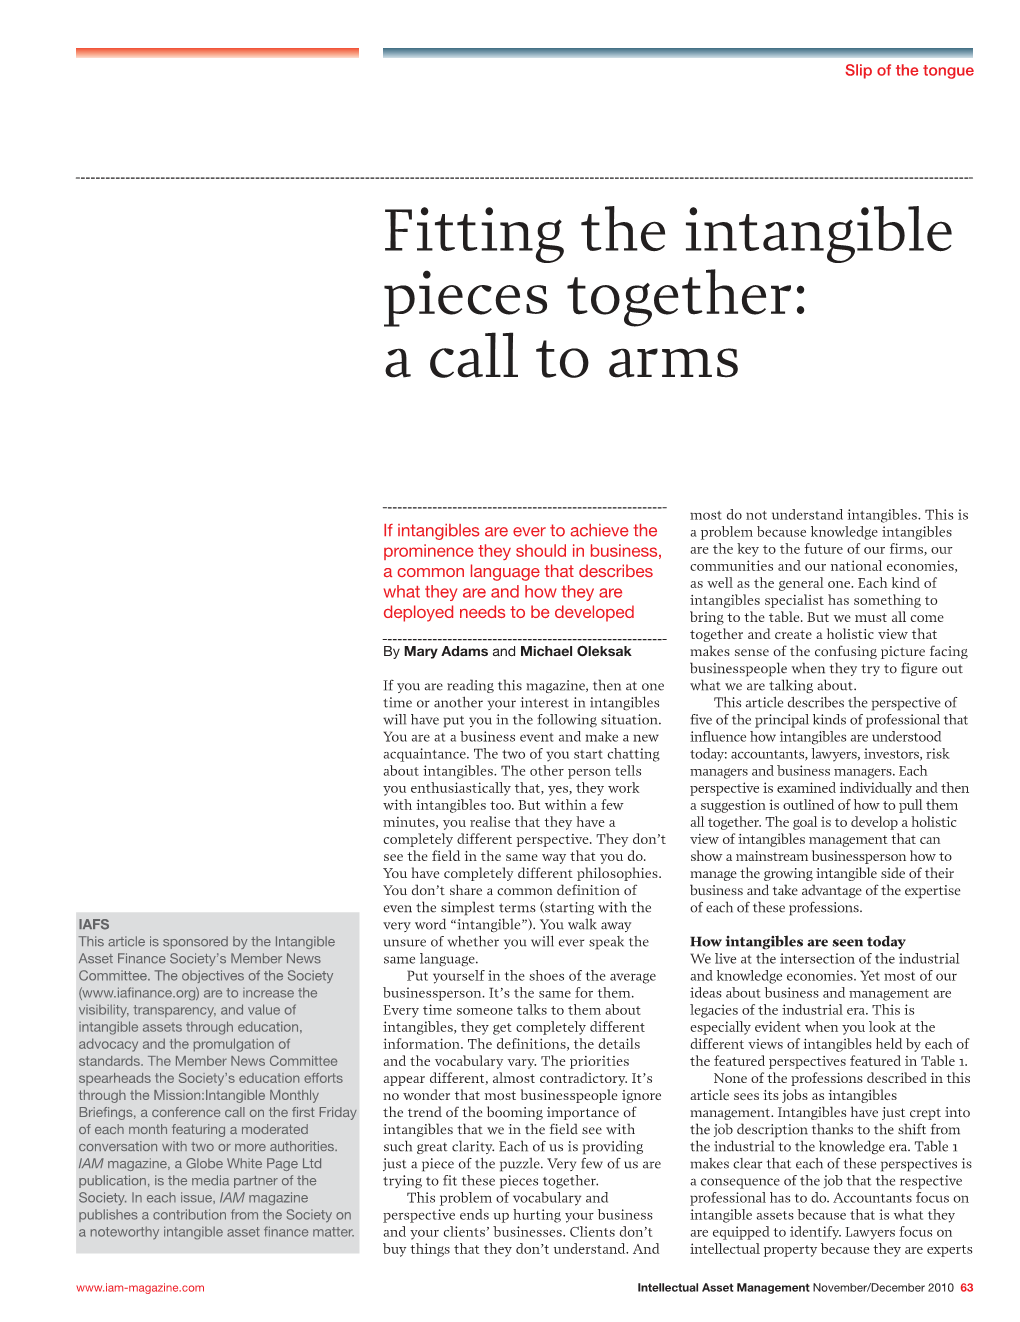 Fitting the Intangible Pieces Together: a Call to Arms